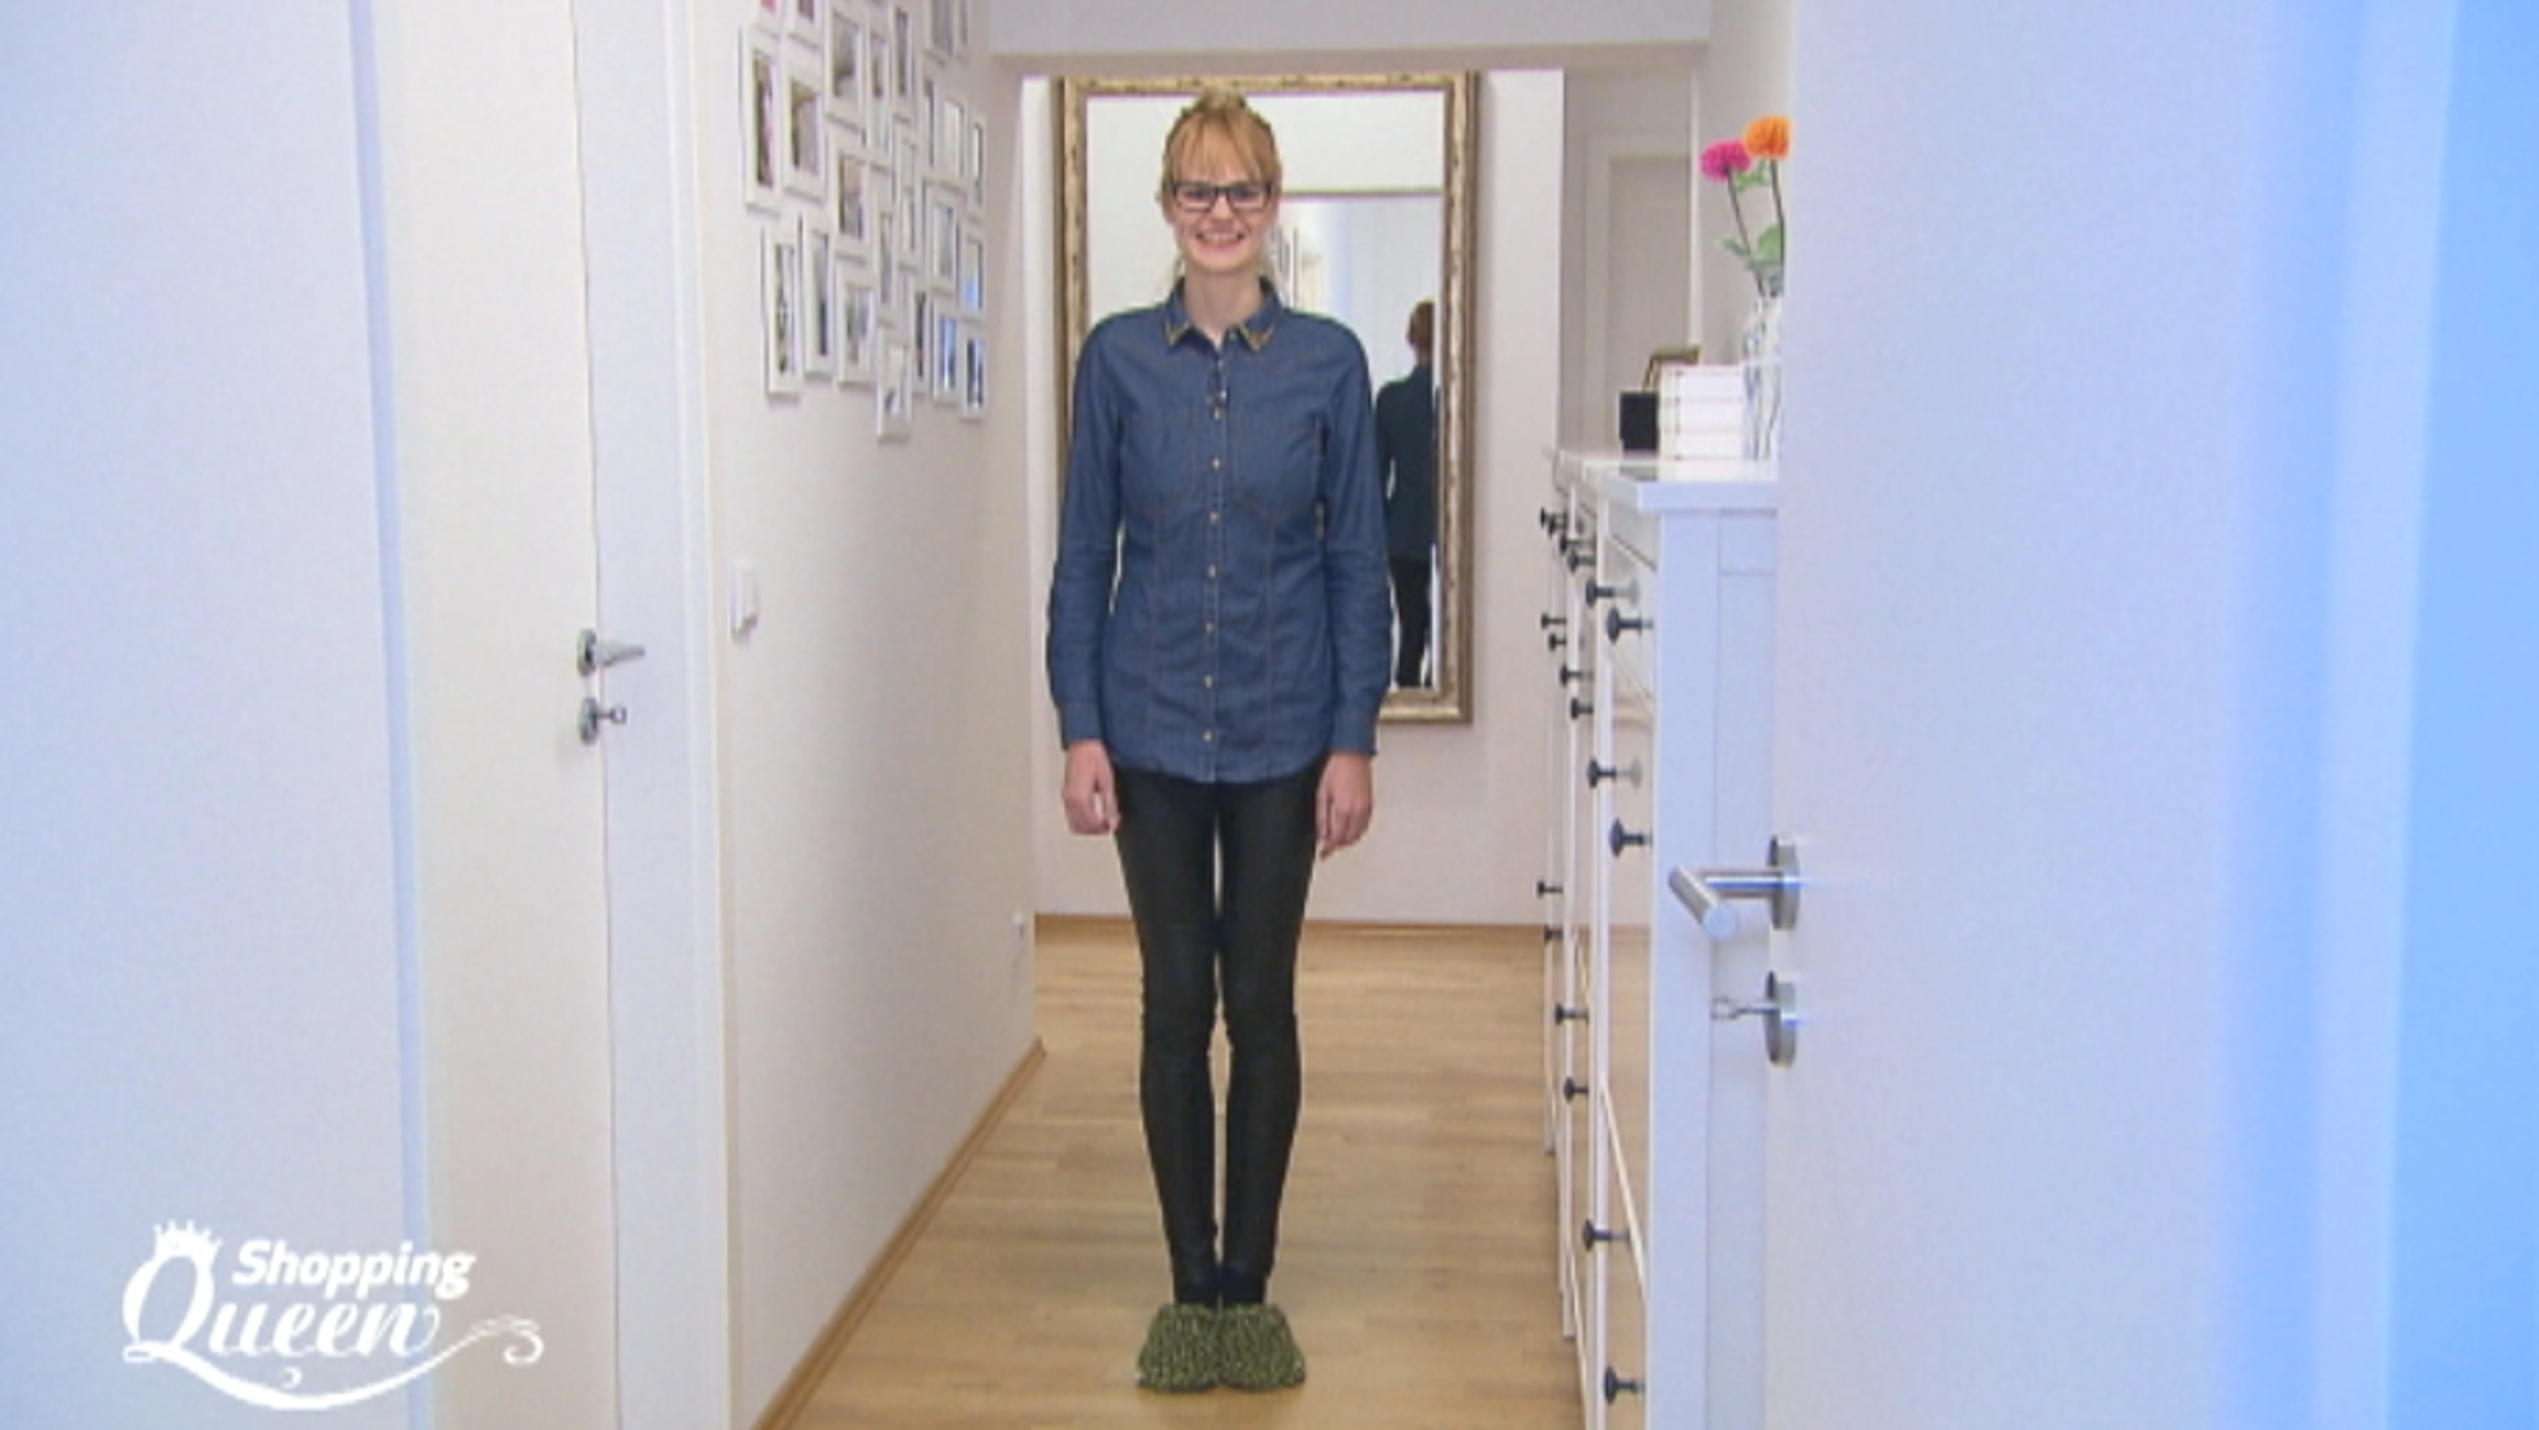 Desiree im Style-Check bei "Shopping Queen"